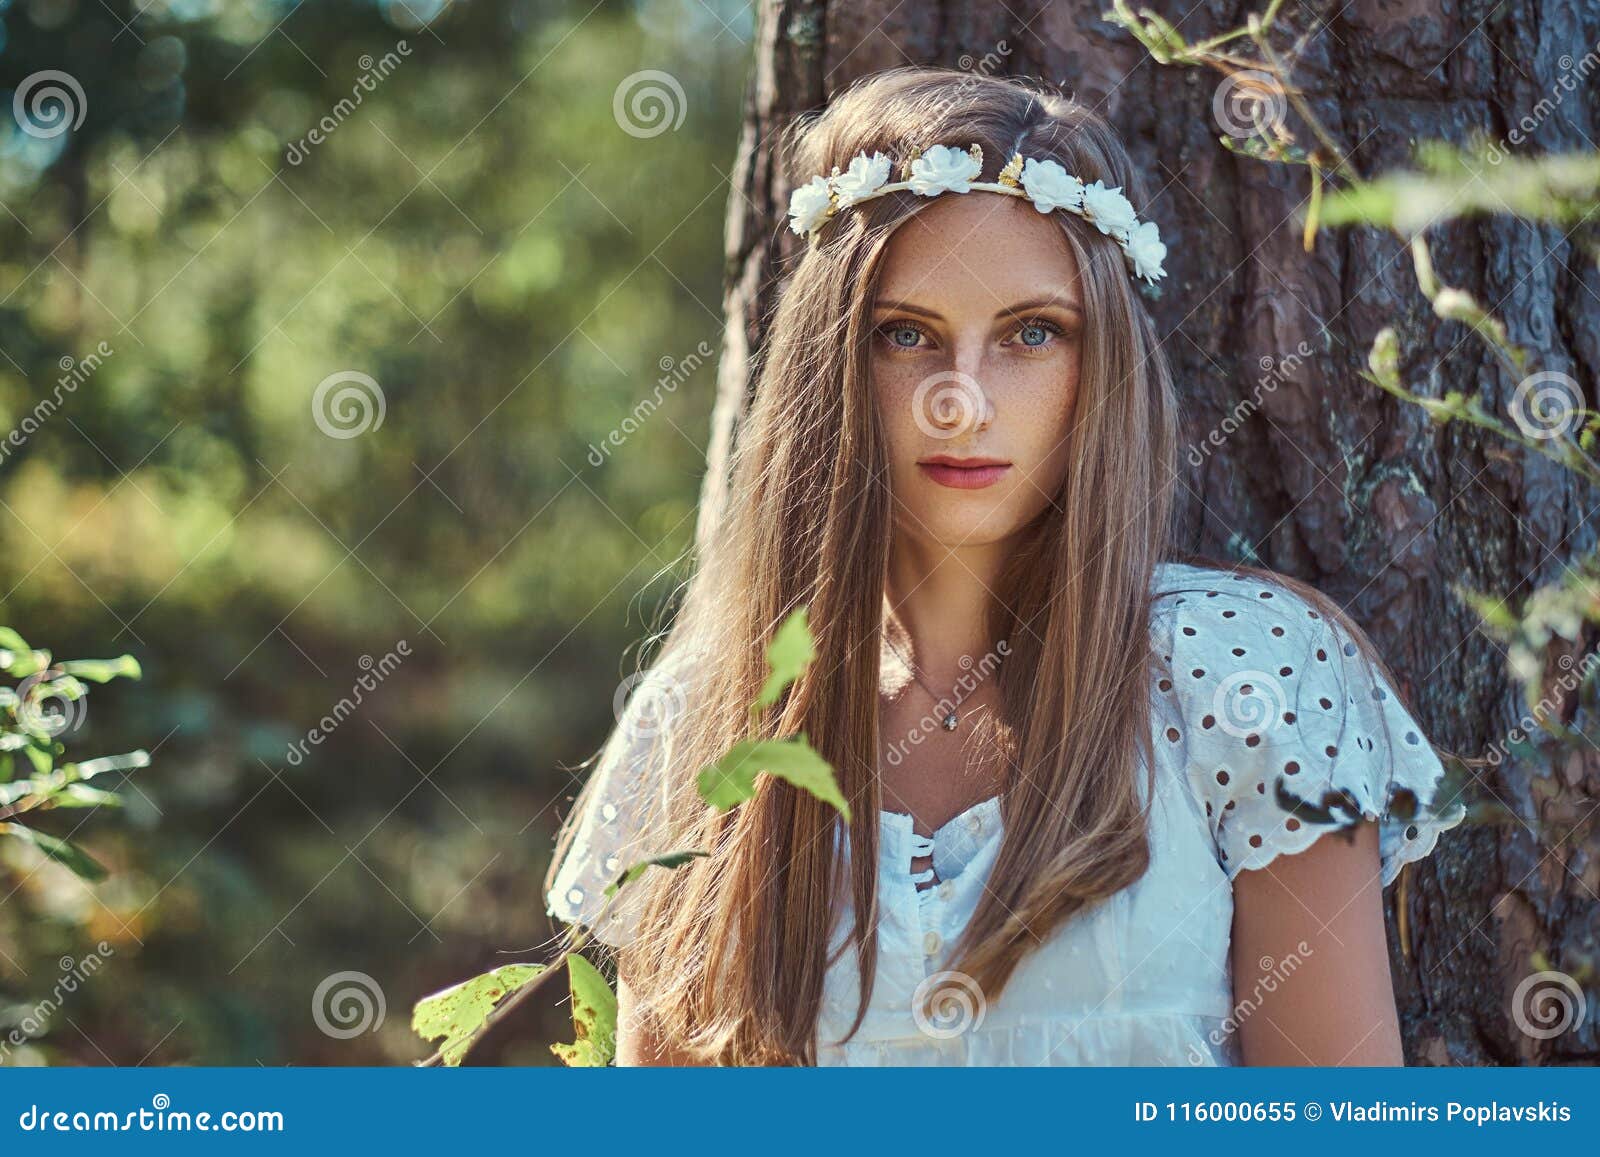 A Beautiful Woman In A White Dress And White Wreath On Head Posing In A Green Autumn Forest